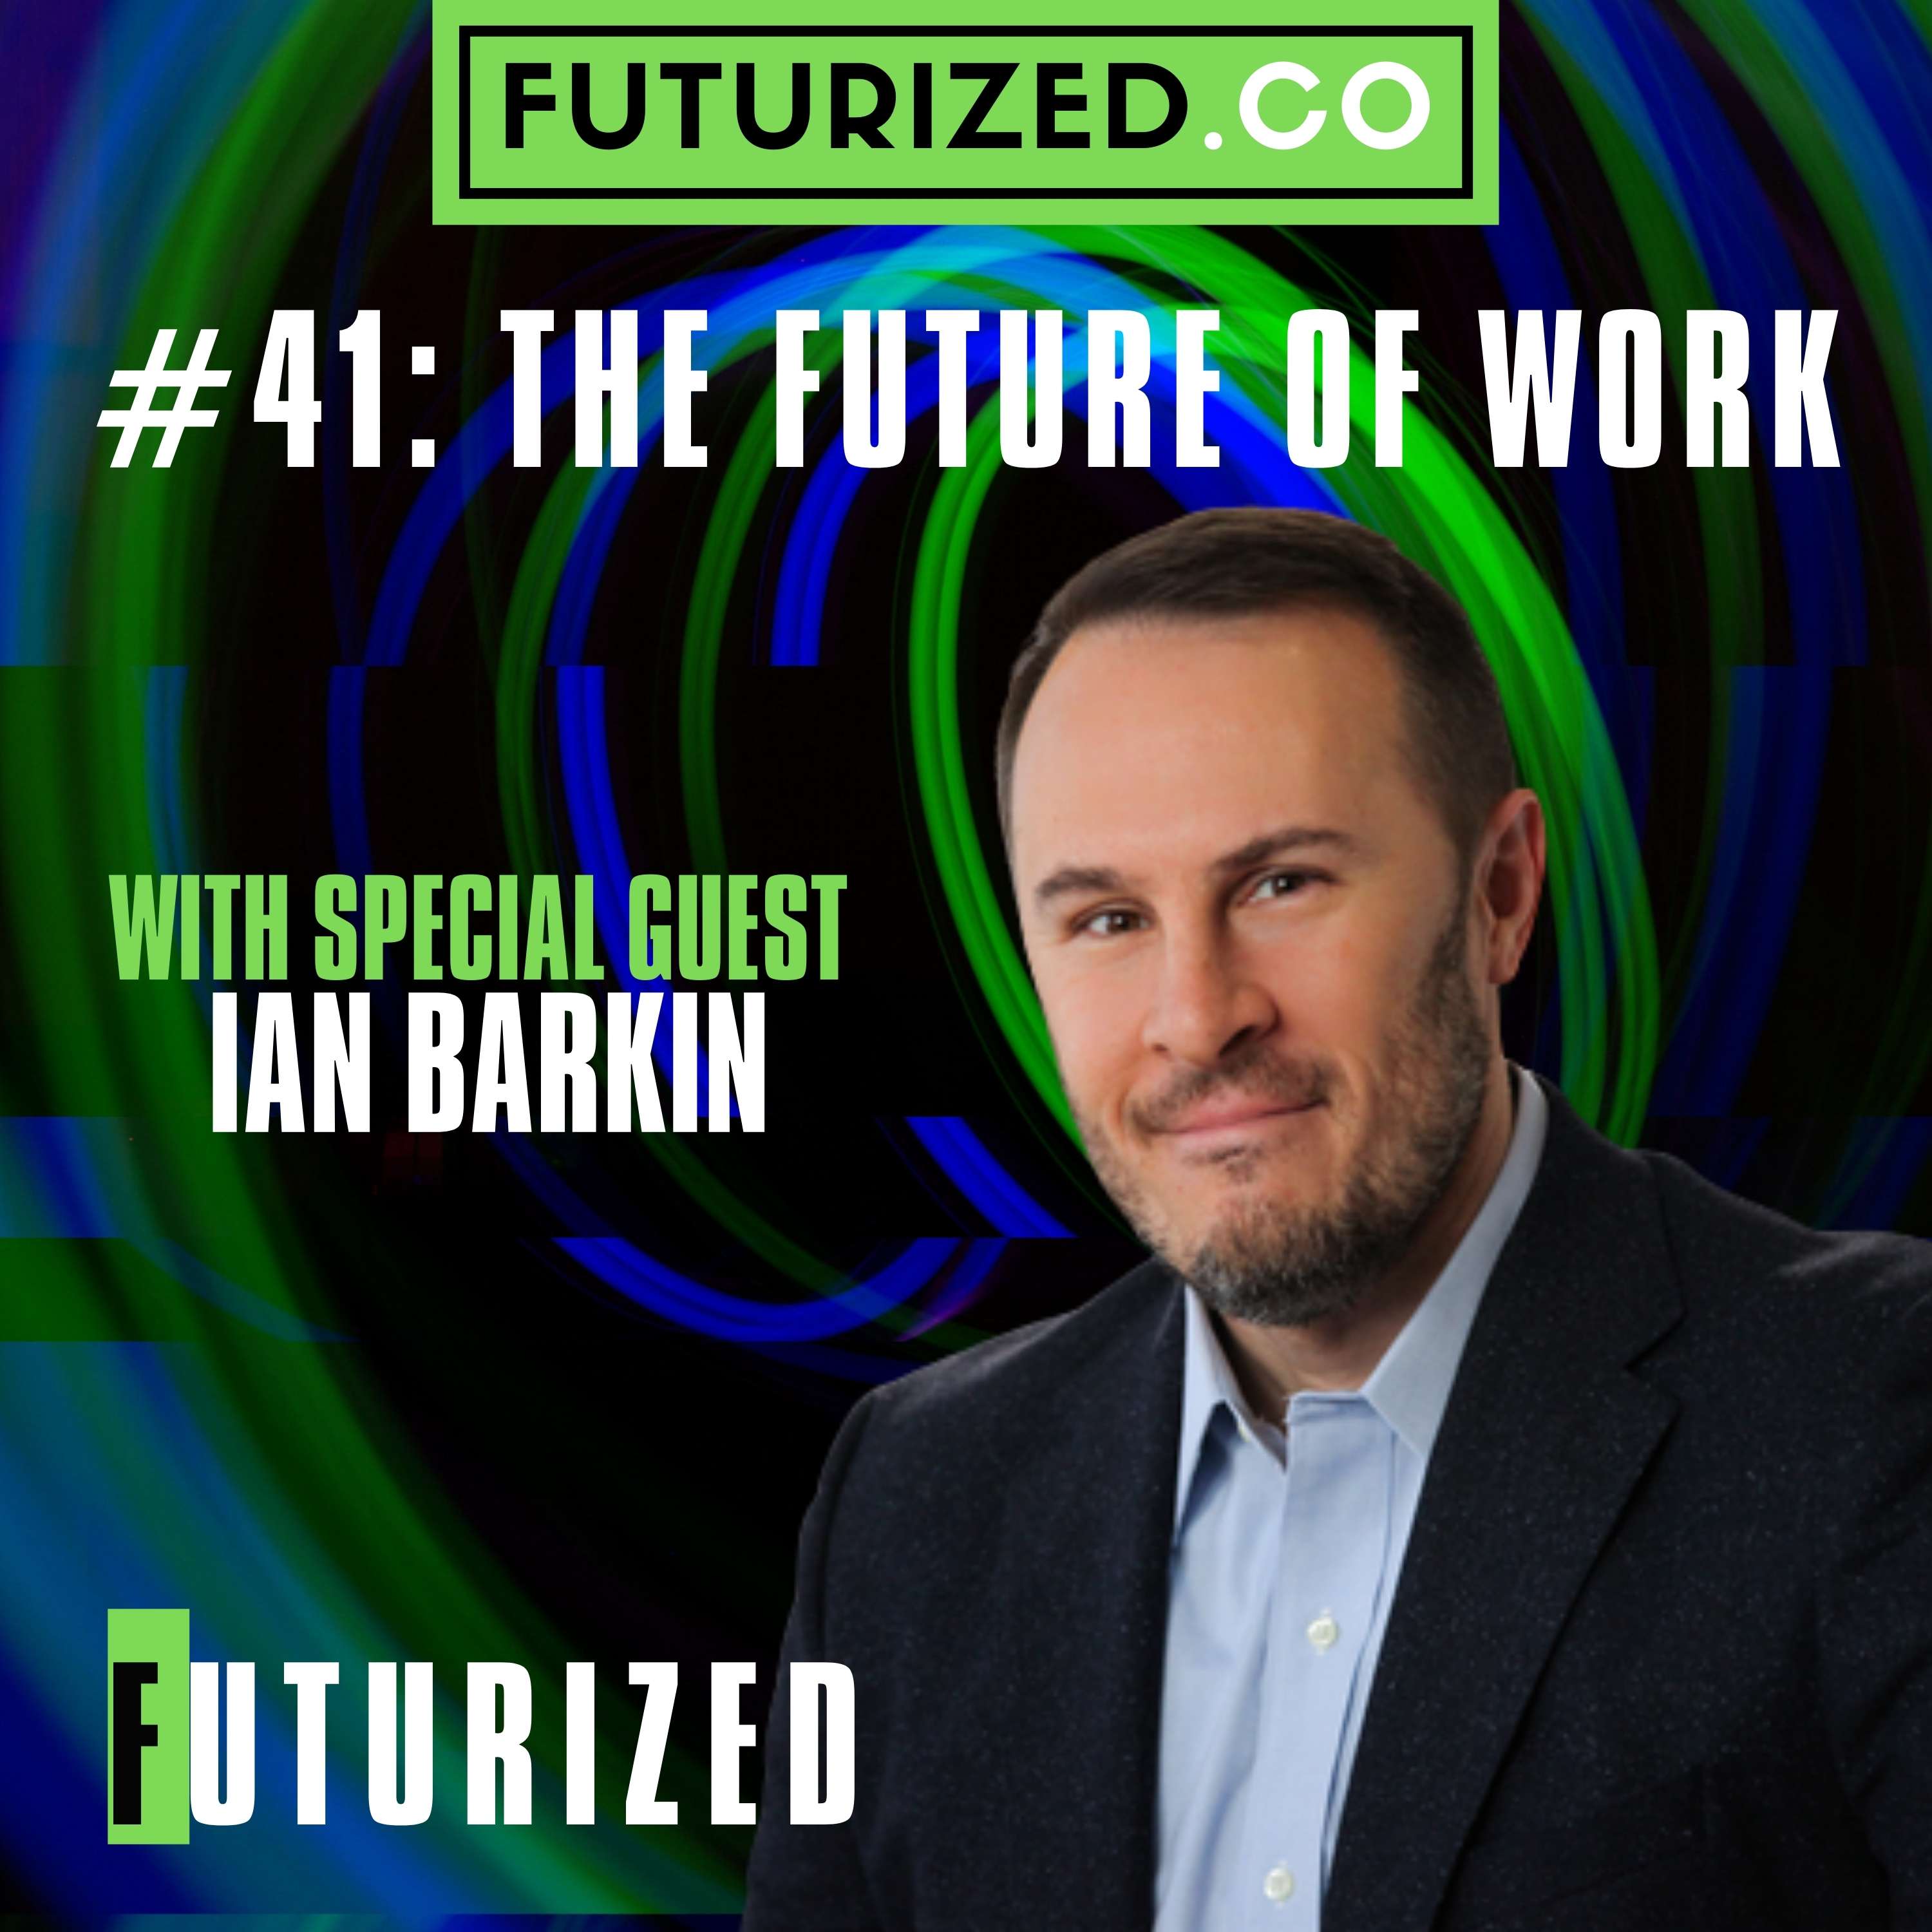 The Future of Work Image